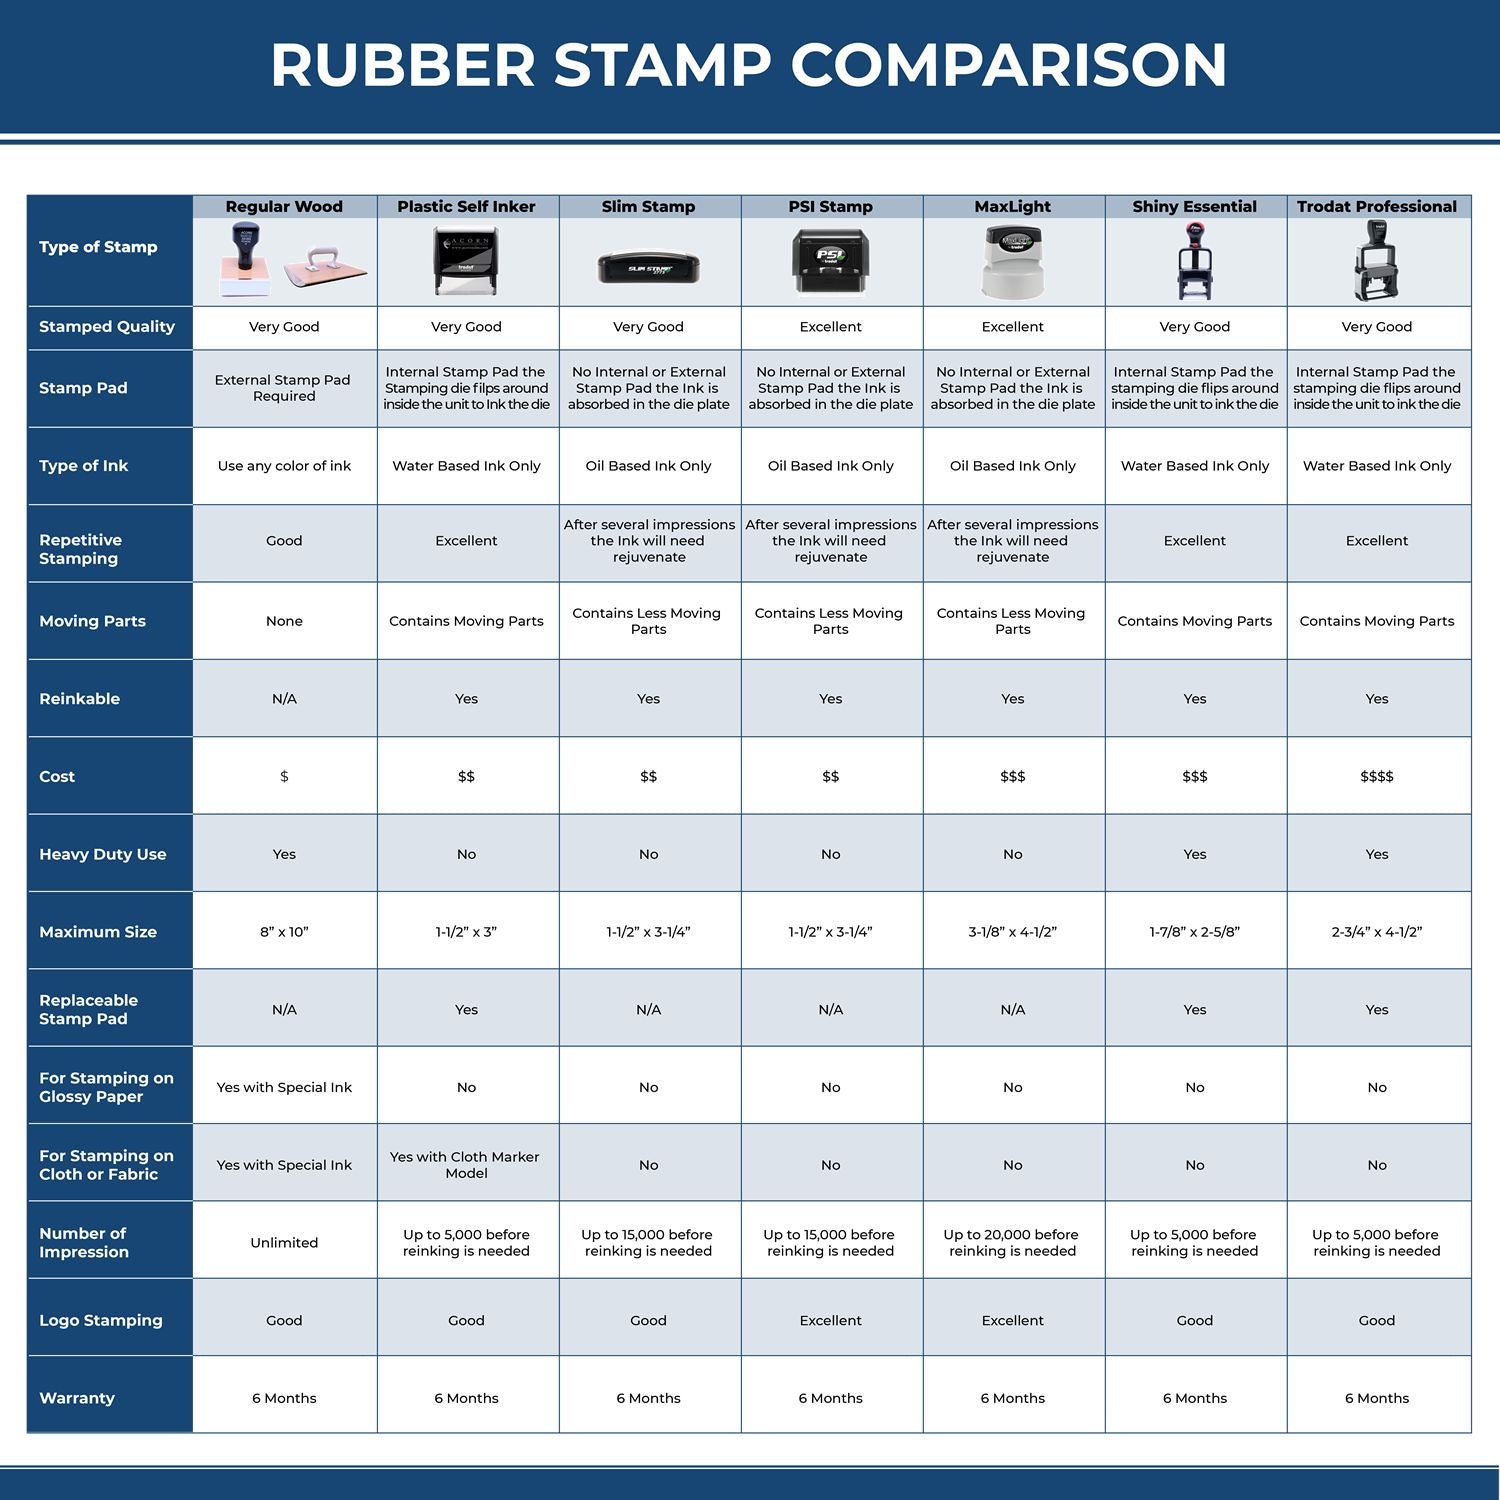 Large Self-Inking Social Distancing 6 Feet Stamp 5509S Rubber Stamp Comparison